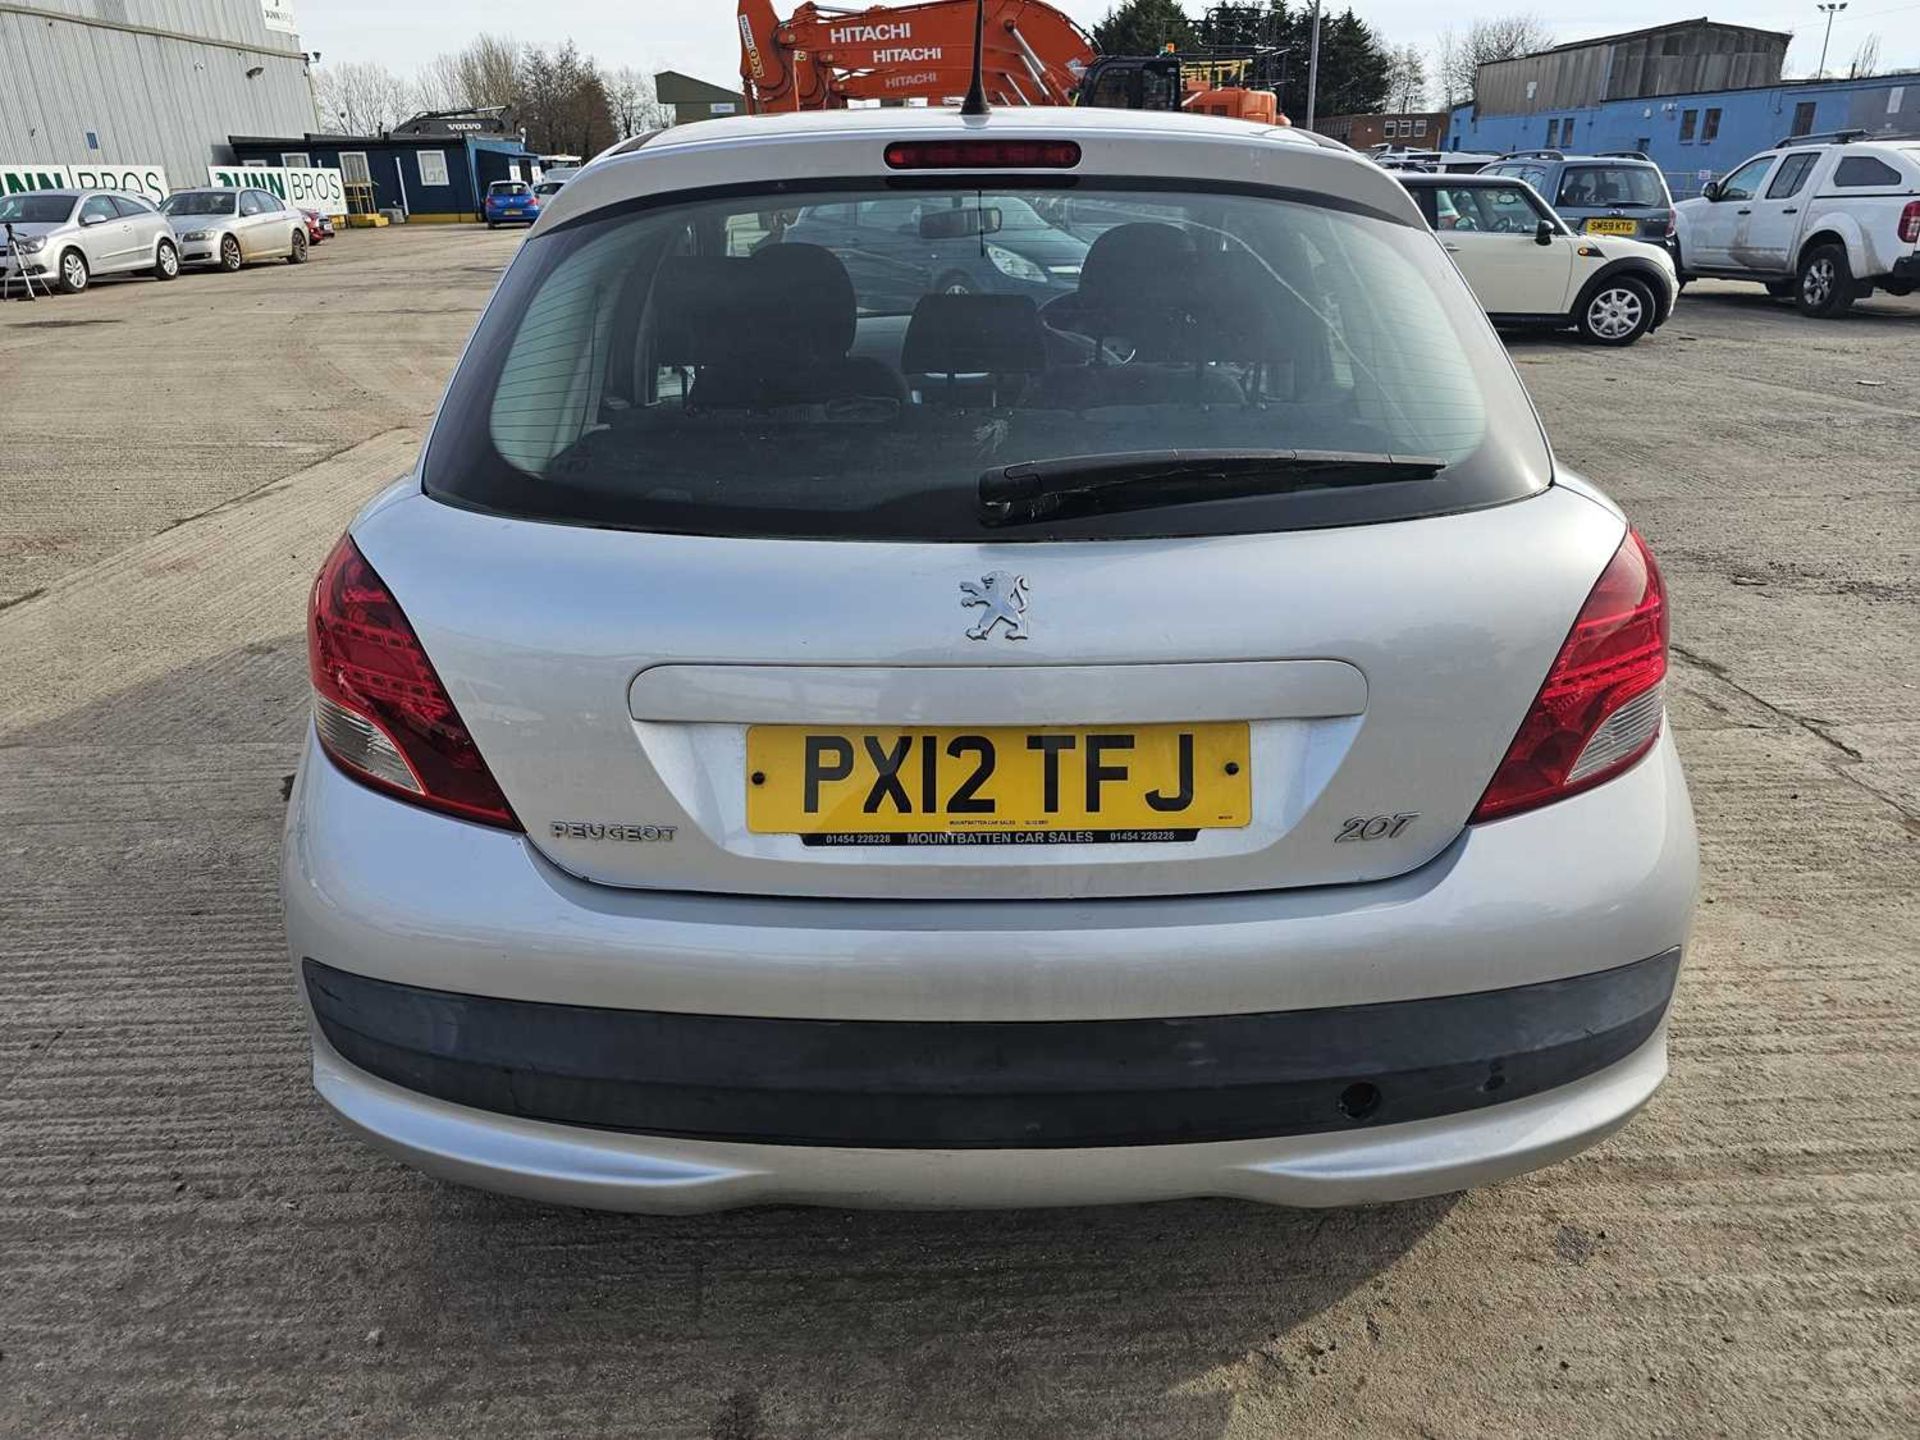 2012 Peugeot 207, 5 Speed, A/C (Reg. Docs. Available, Tested 06/24) - Image 2 of 28